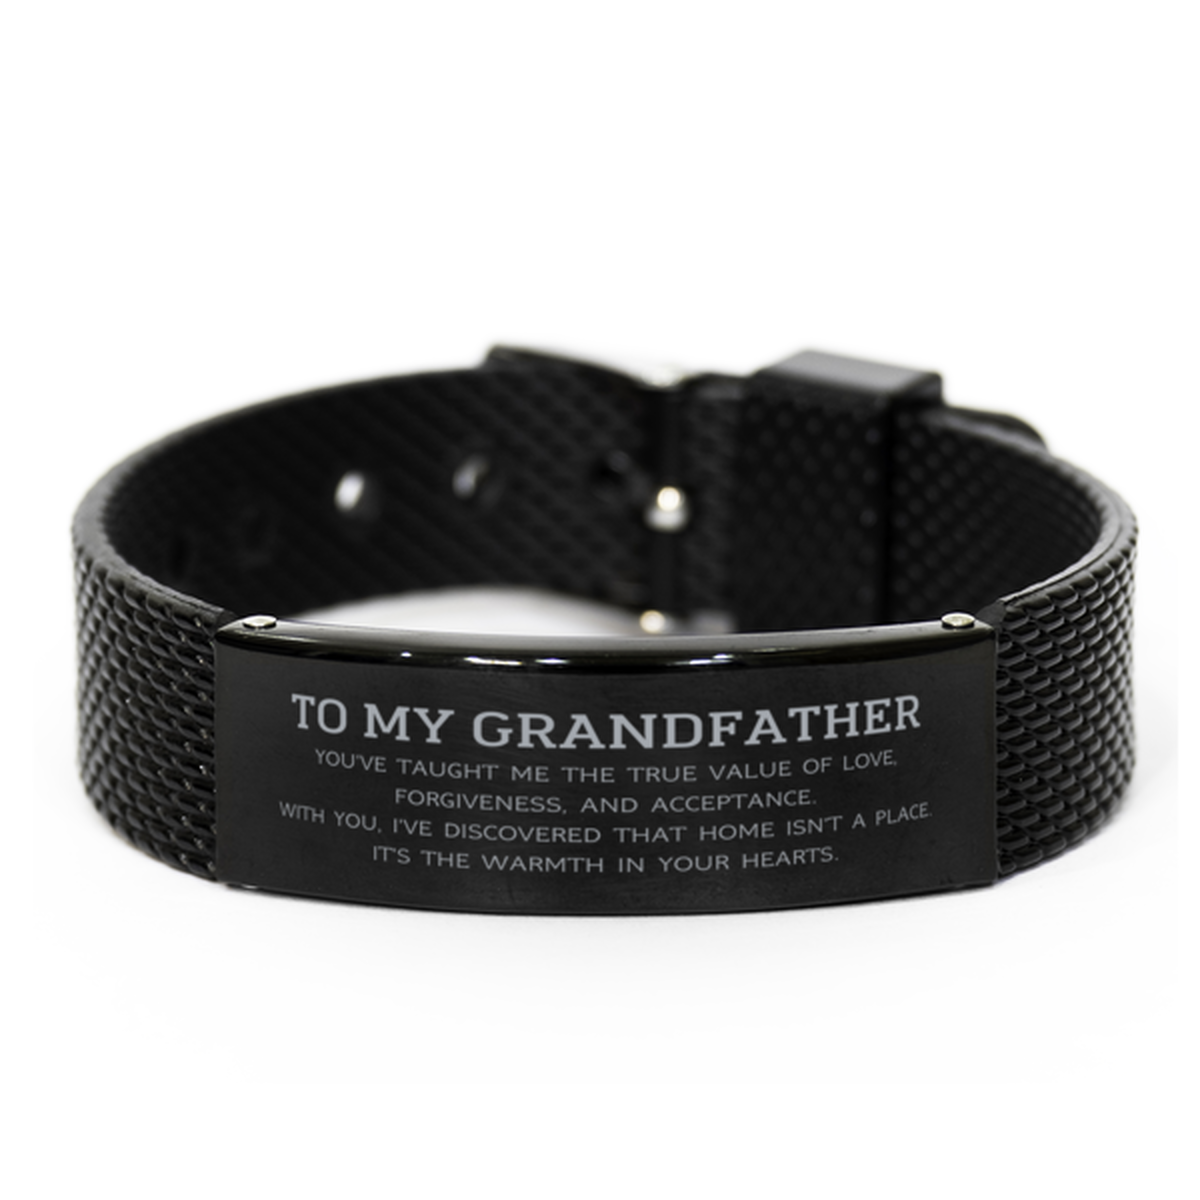 To My Grandfather Gifts, You've taught me the true value of love, Thank You Gifts For Grandfather, Birthday Black Shark Mesh Bracelet For Grandfather